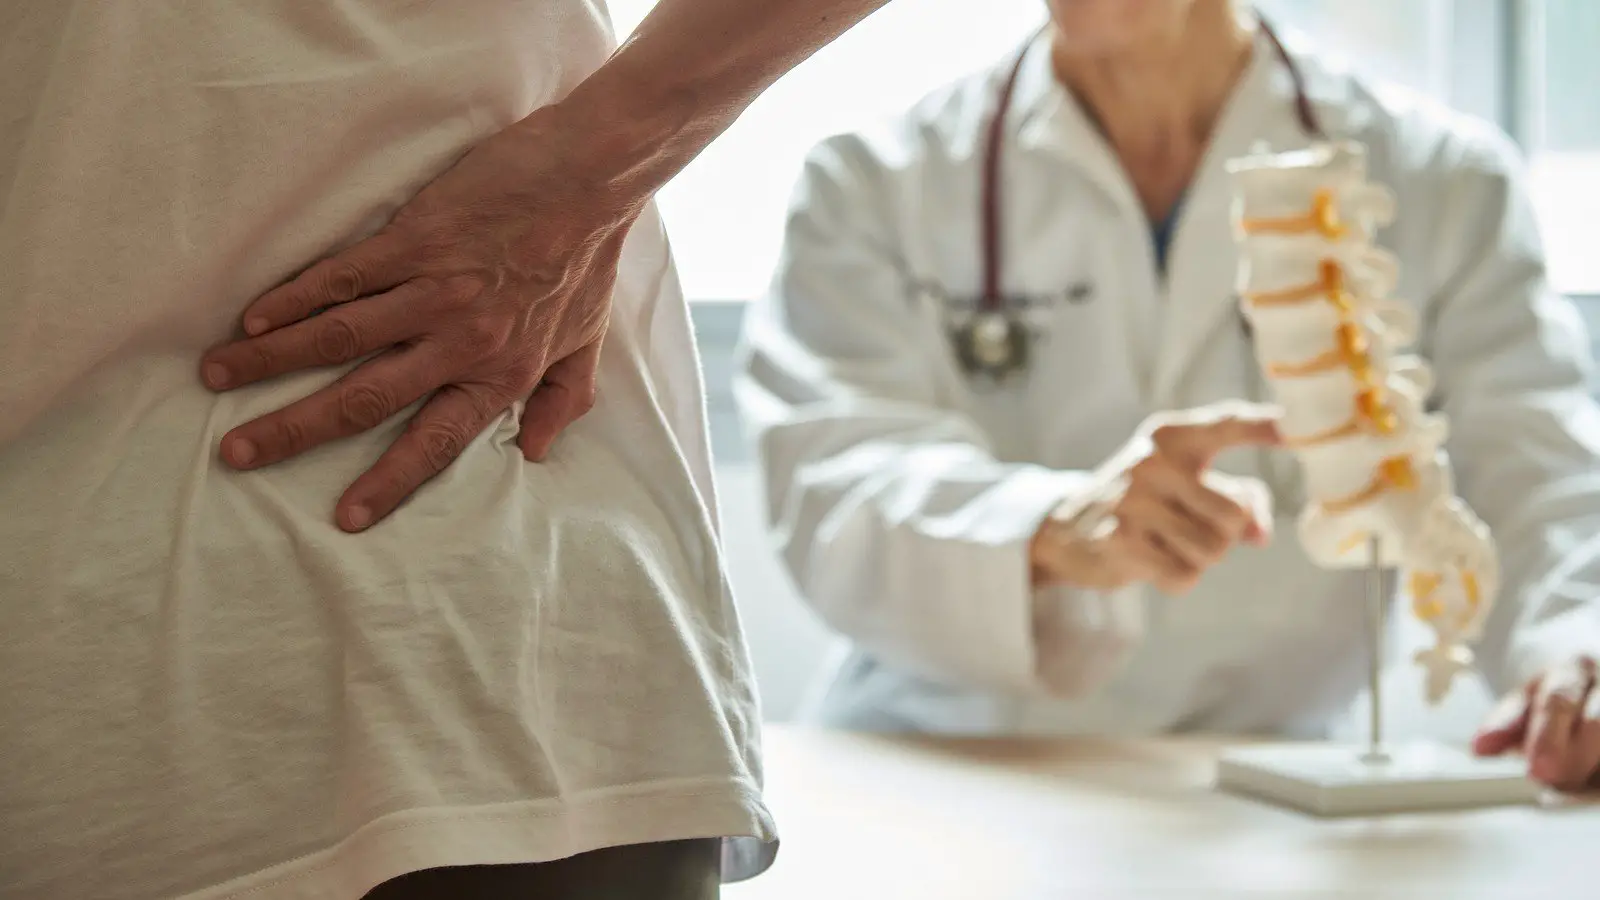 Lower Back Pain Can Improve After Total Hip Replacement